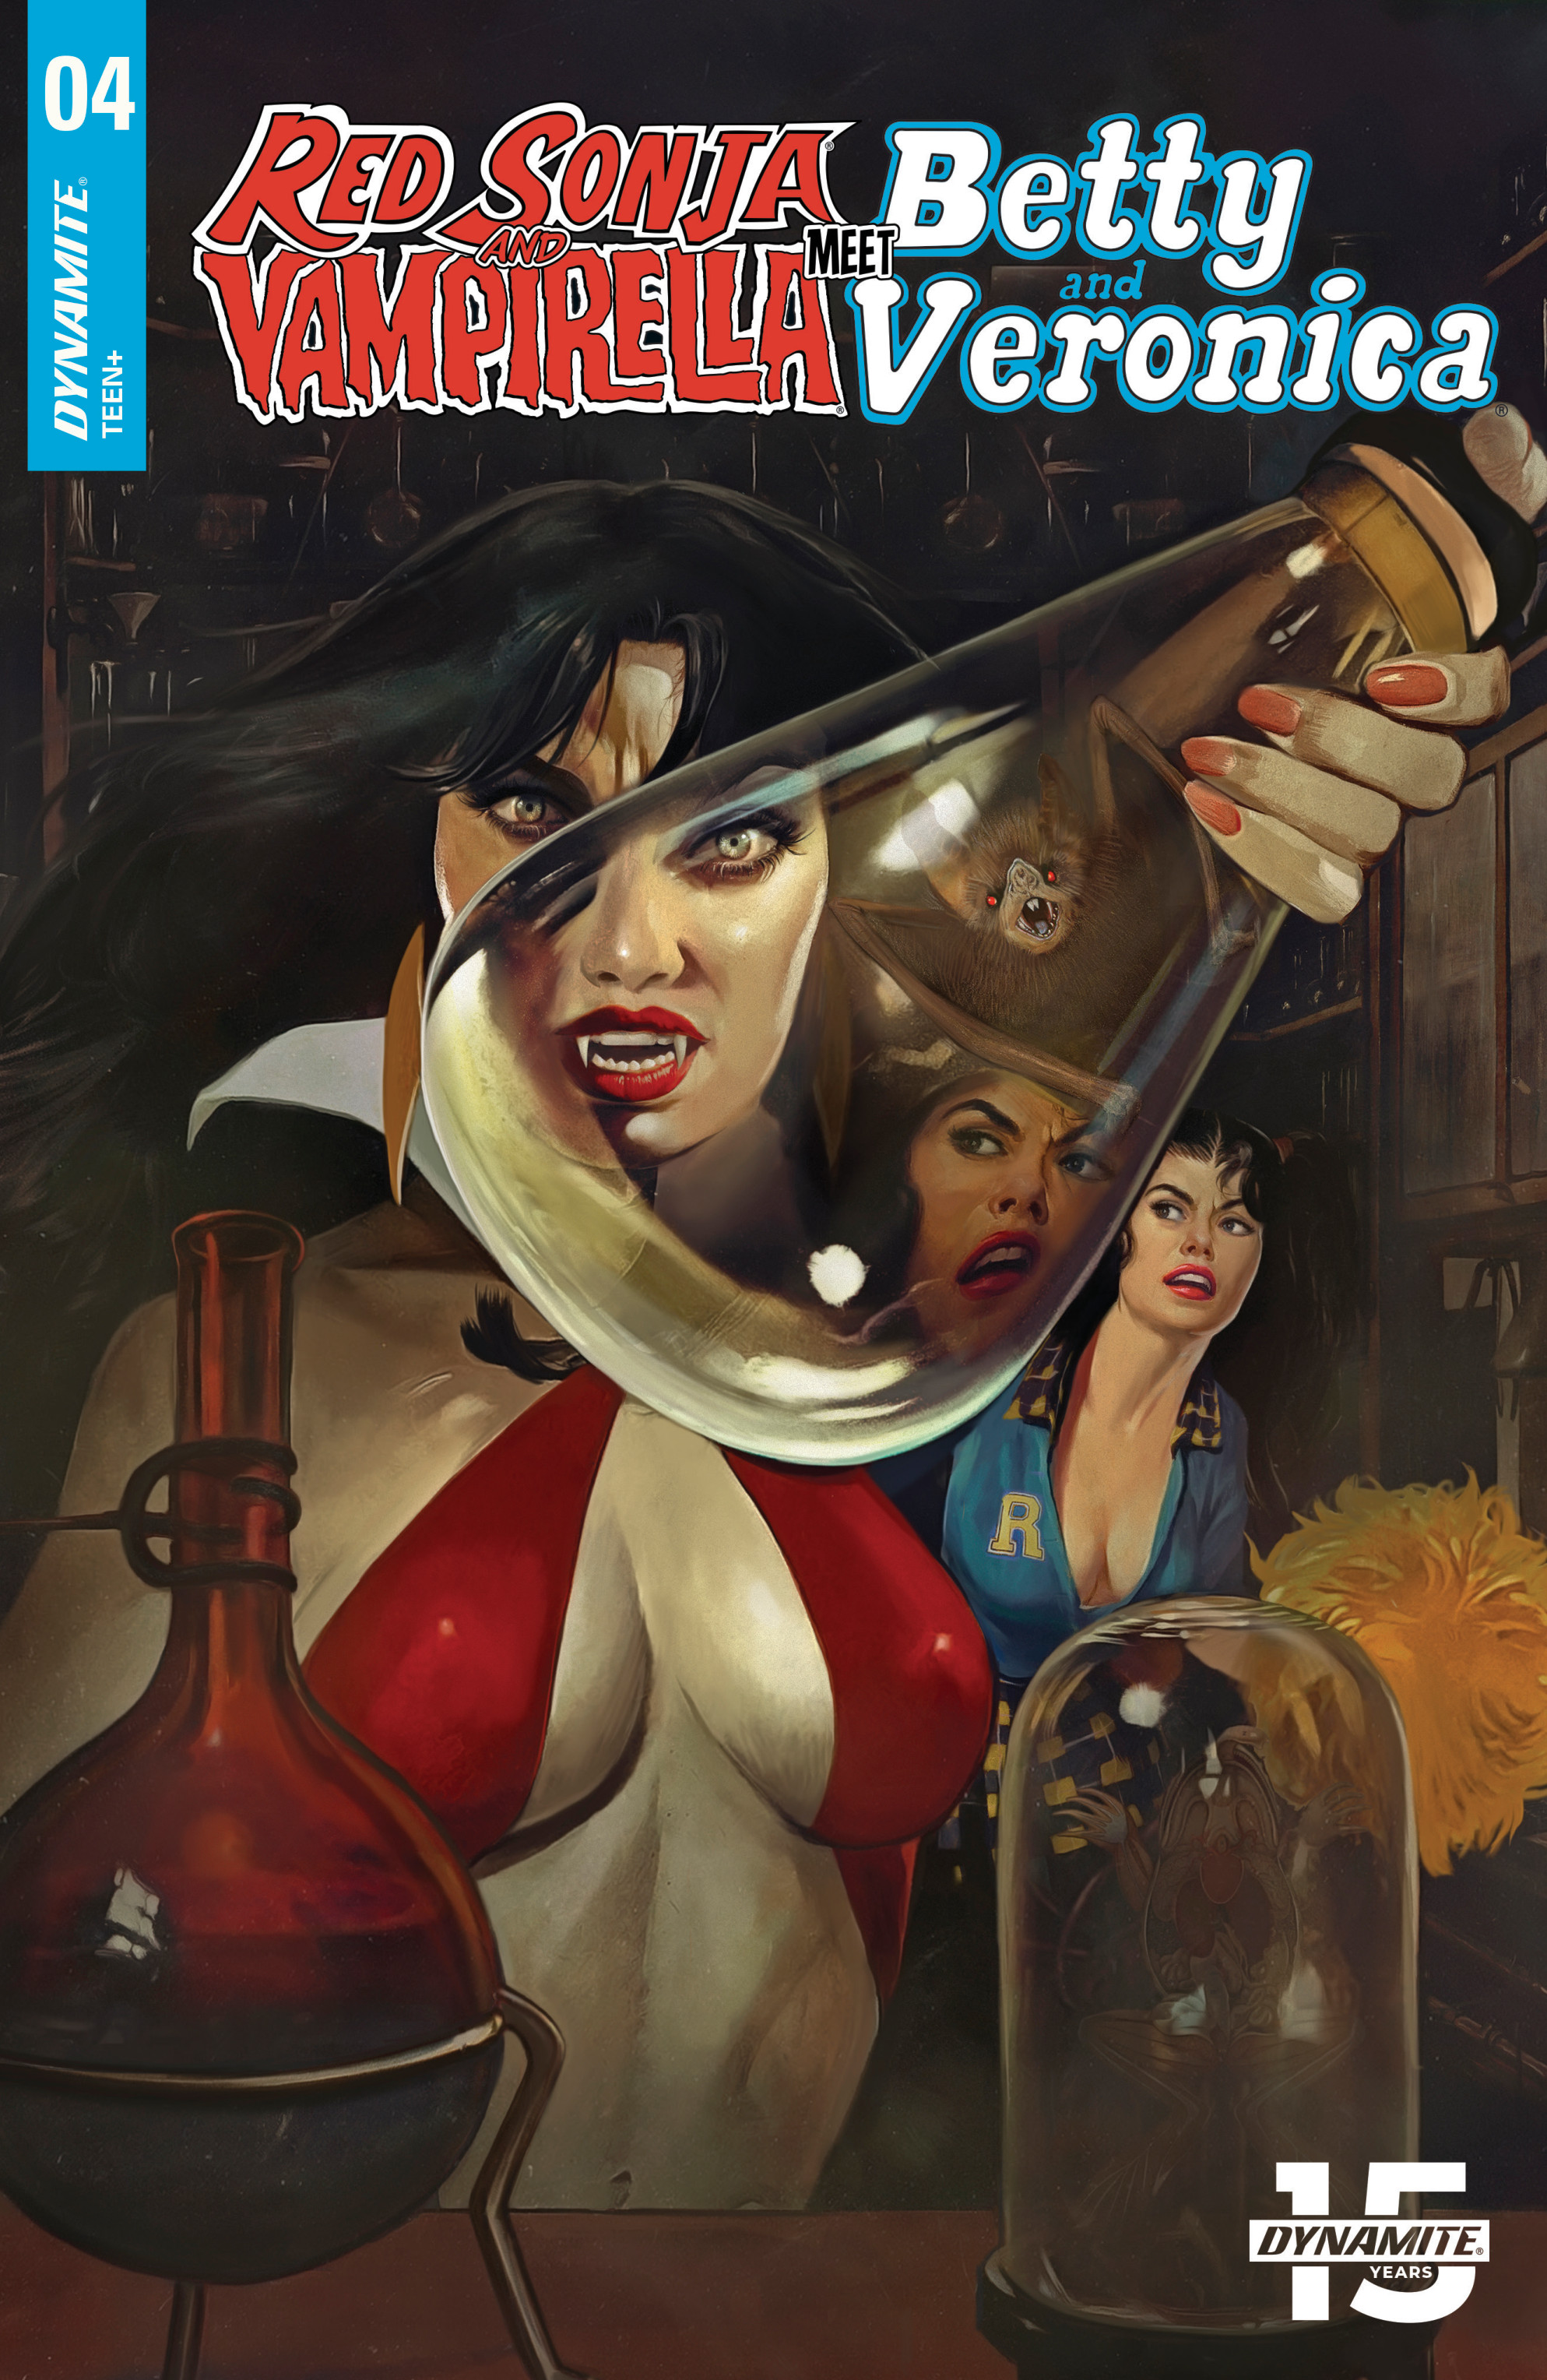 Read online Red Sonja and Vampirella Meet Betty and Veronica comic -  Issue #4 - 1